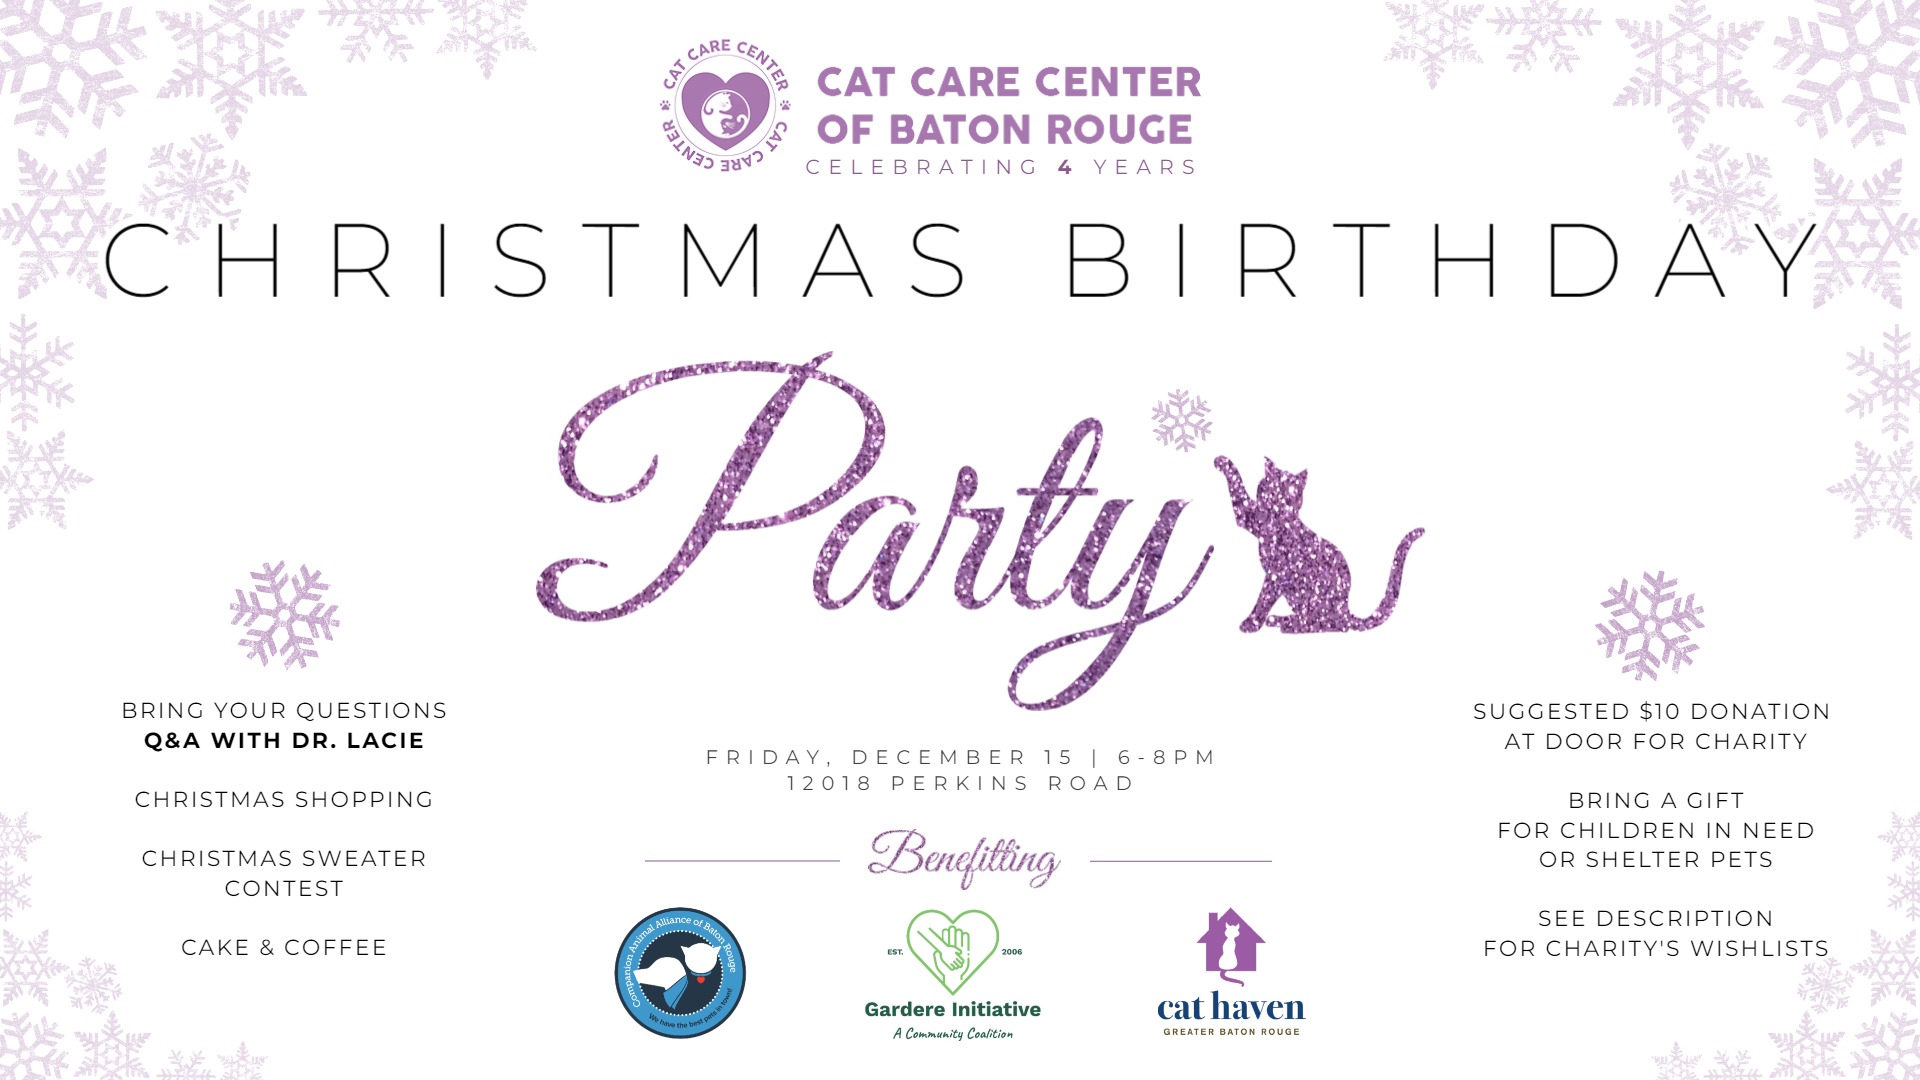 2023 Christmas Birthday Party at Cat Care Center